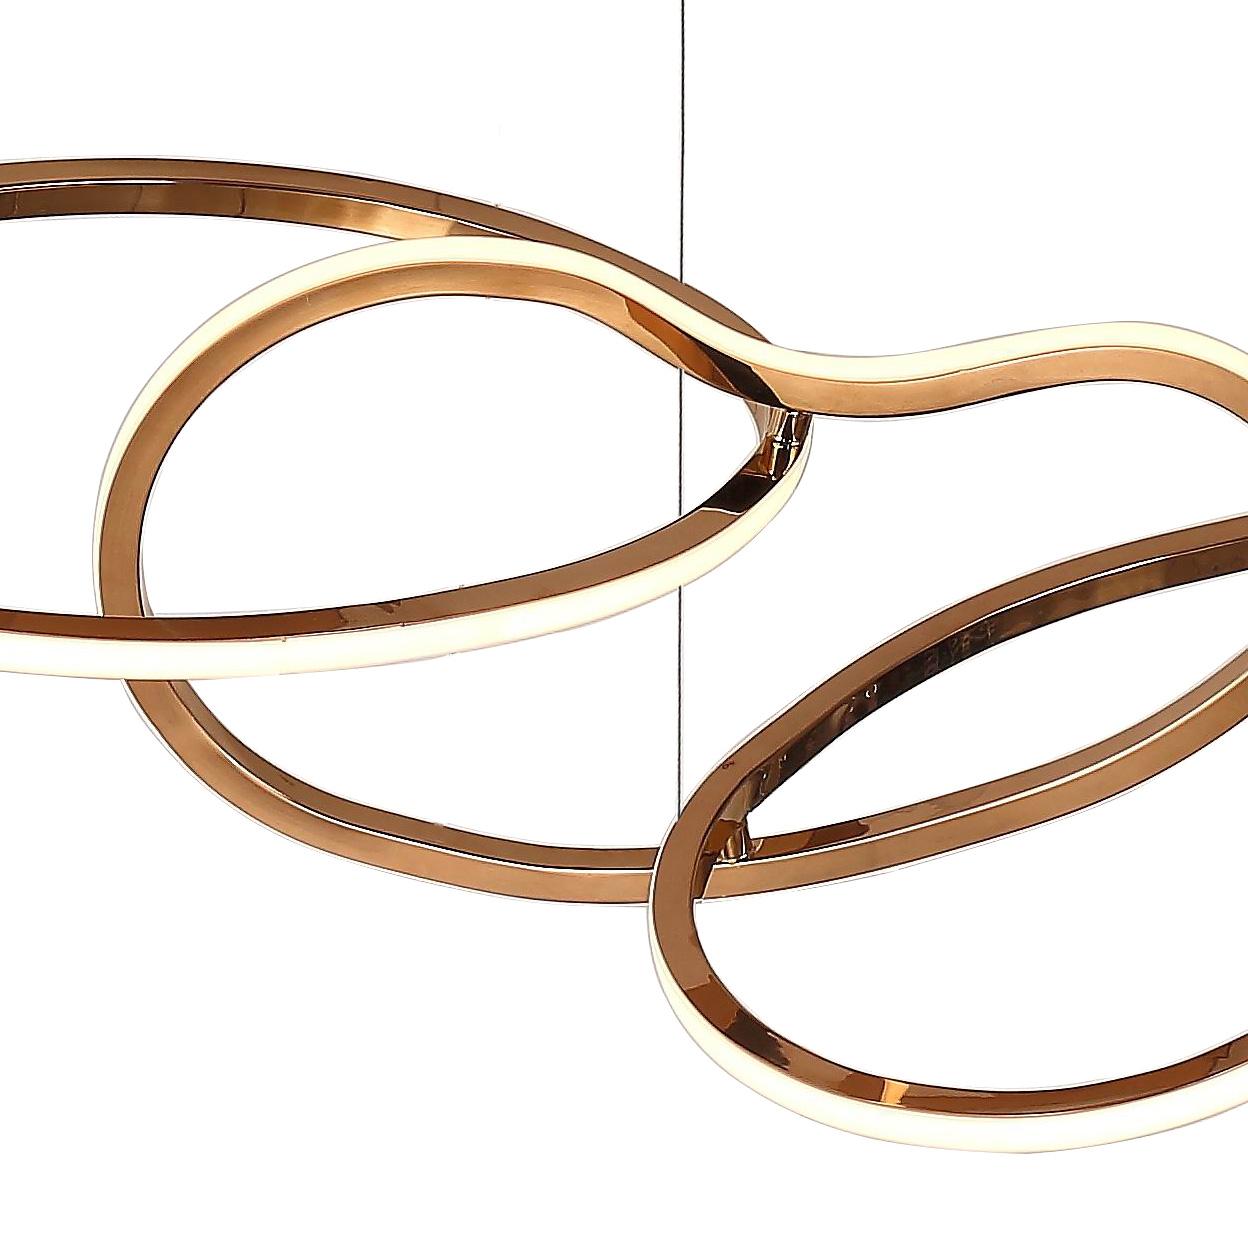 Elegant grouping of 6 metal rings with integrated LED diffusing a clean natural light.
Soft white 3000K.
75 watts – 110 lumens / watt, dimmable.
Finishes:
Rose gold, polished or brushed
Gold, polished or brushed
Champagne gold, polished or